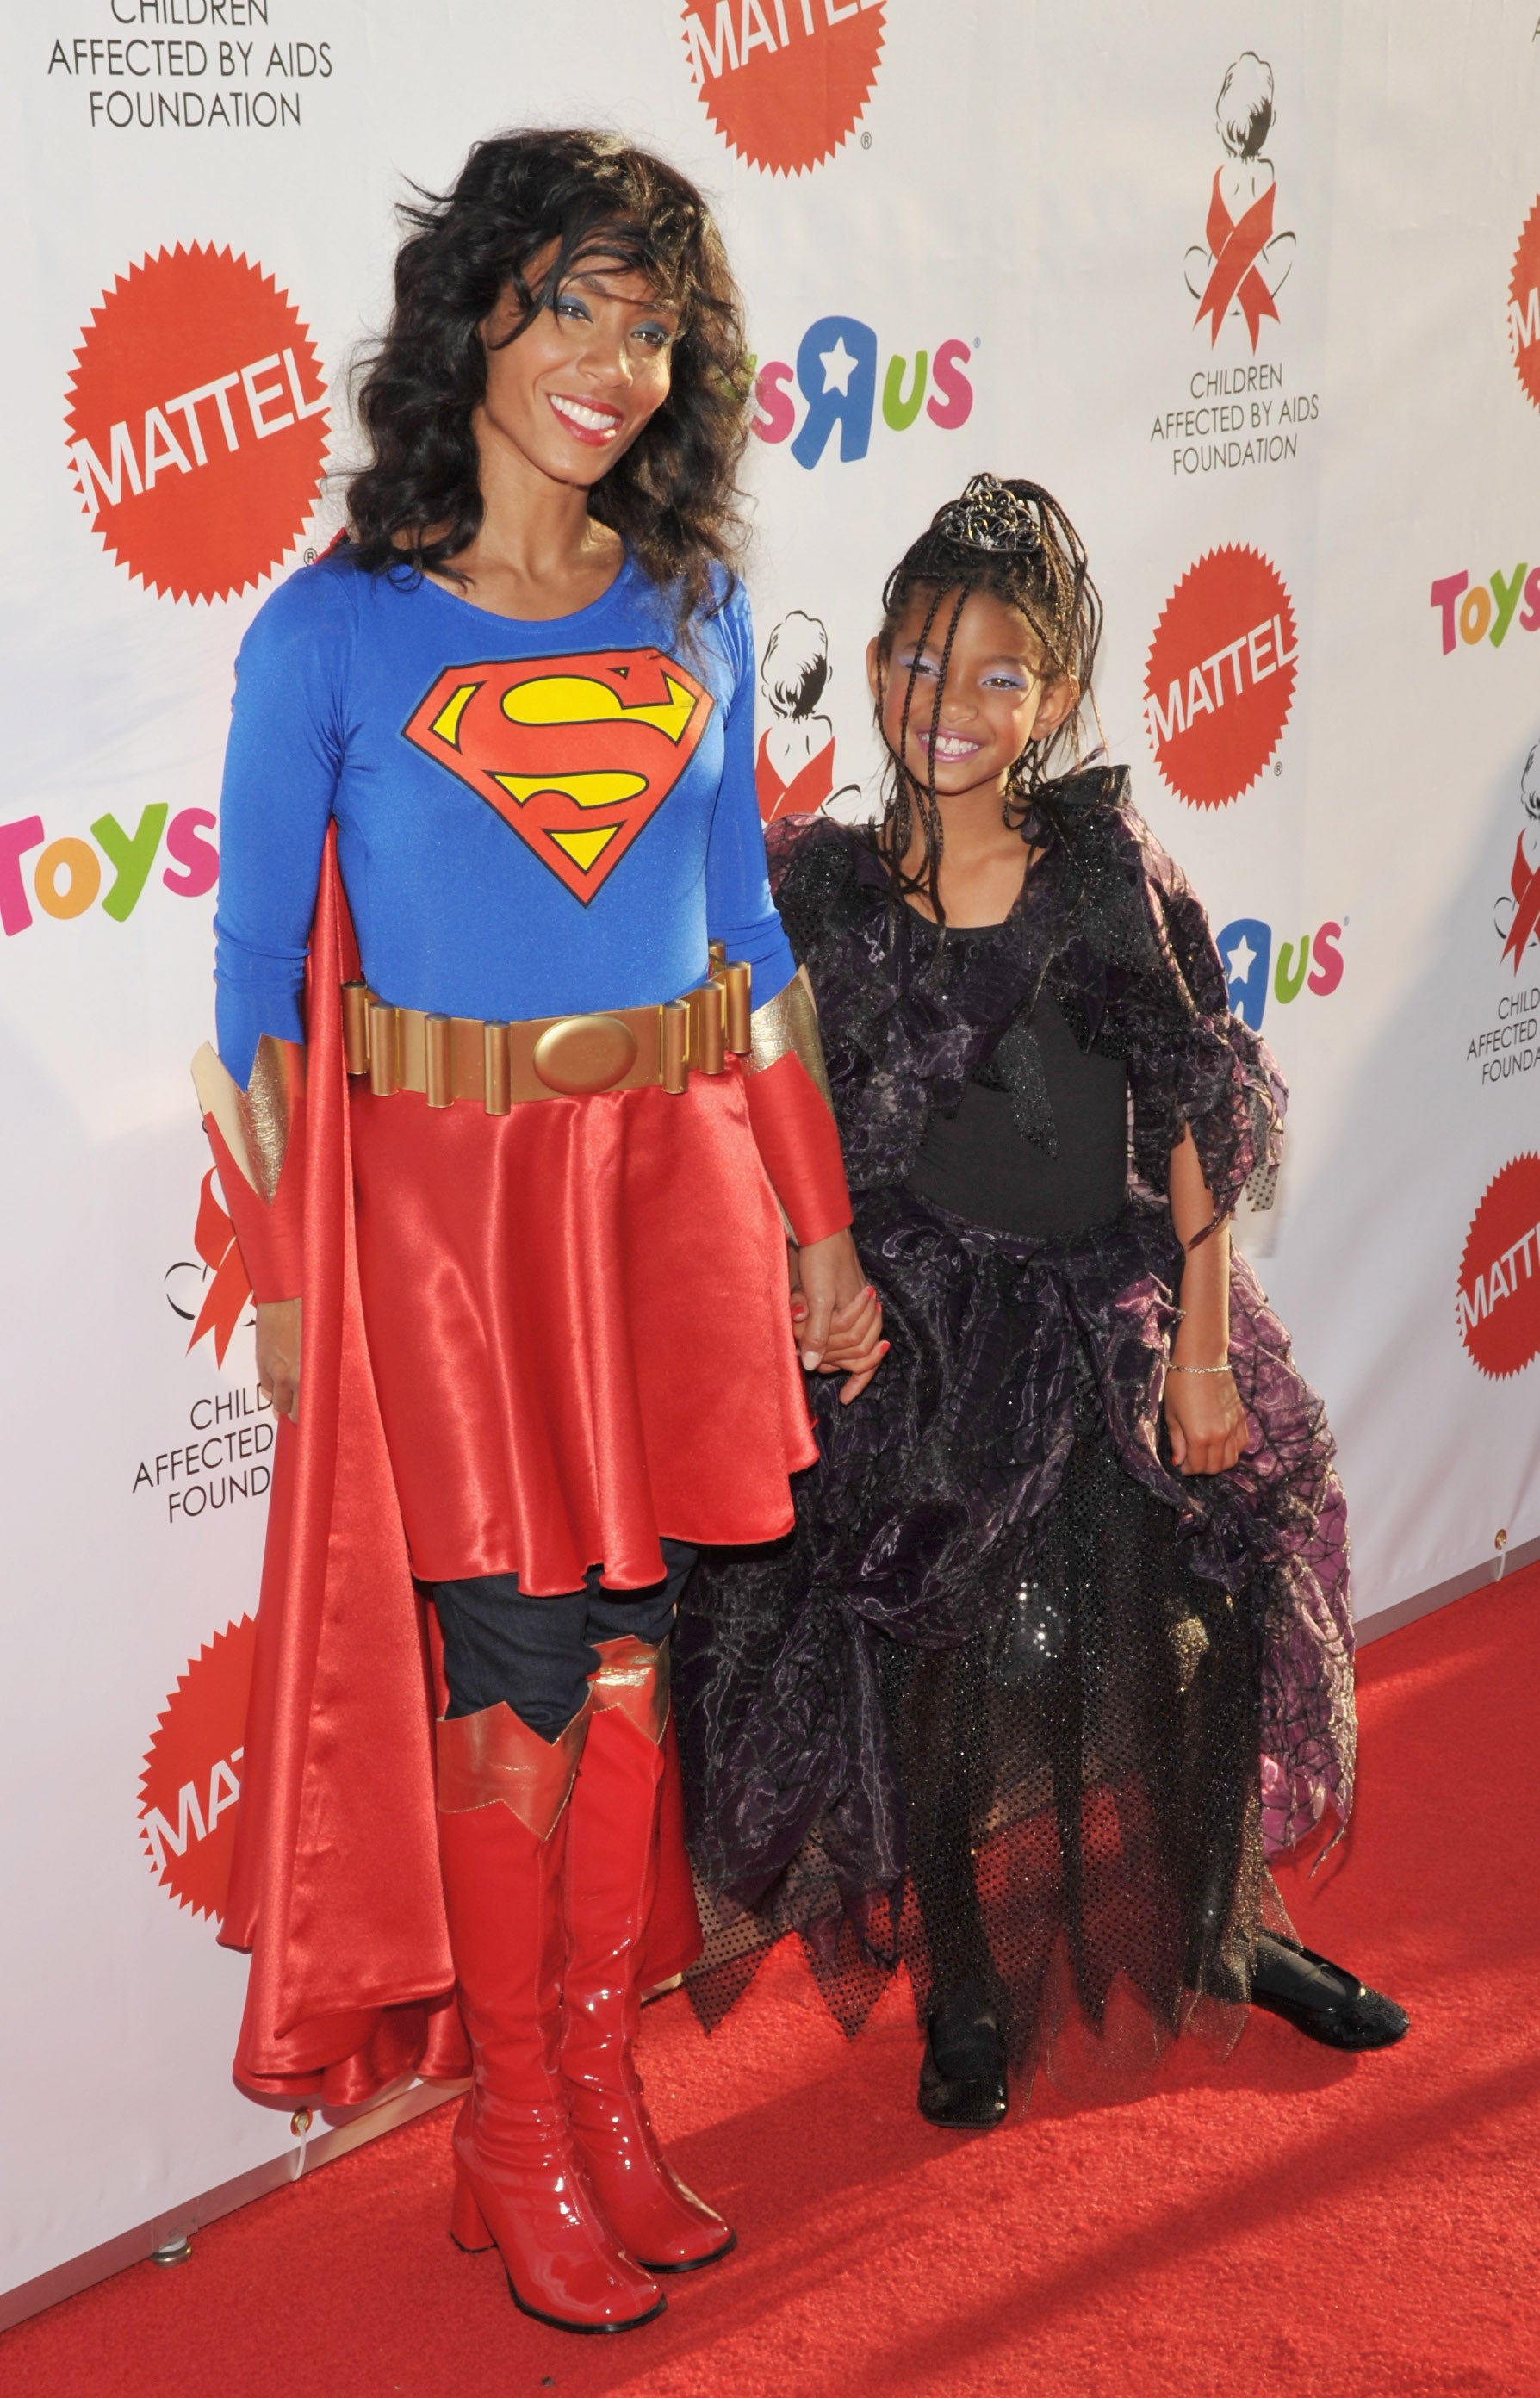 The Best Celebrity Halloween Costumes of All Time
